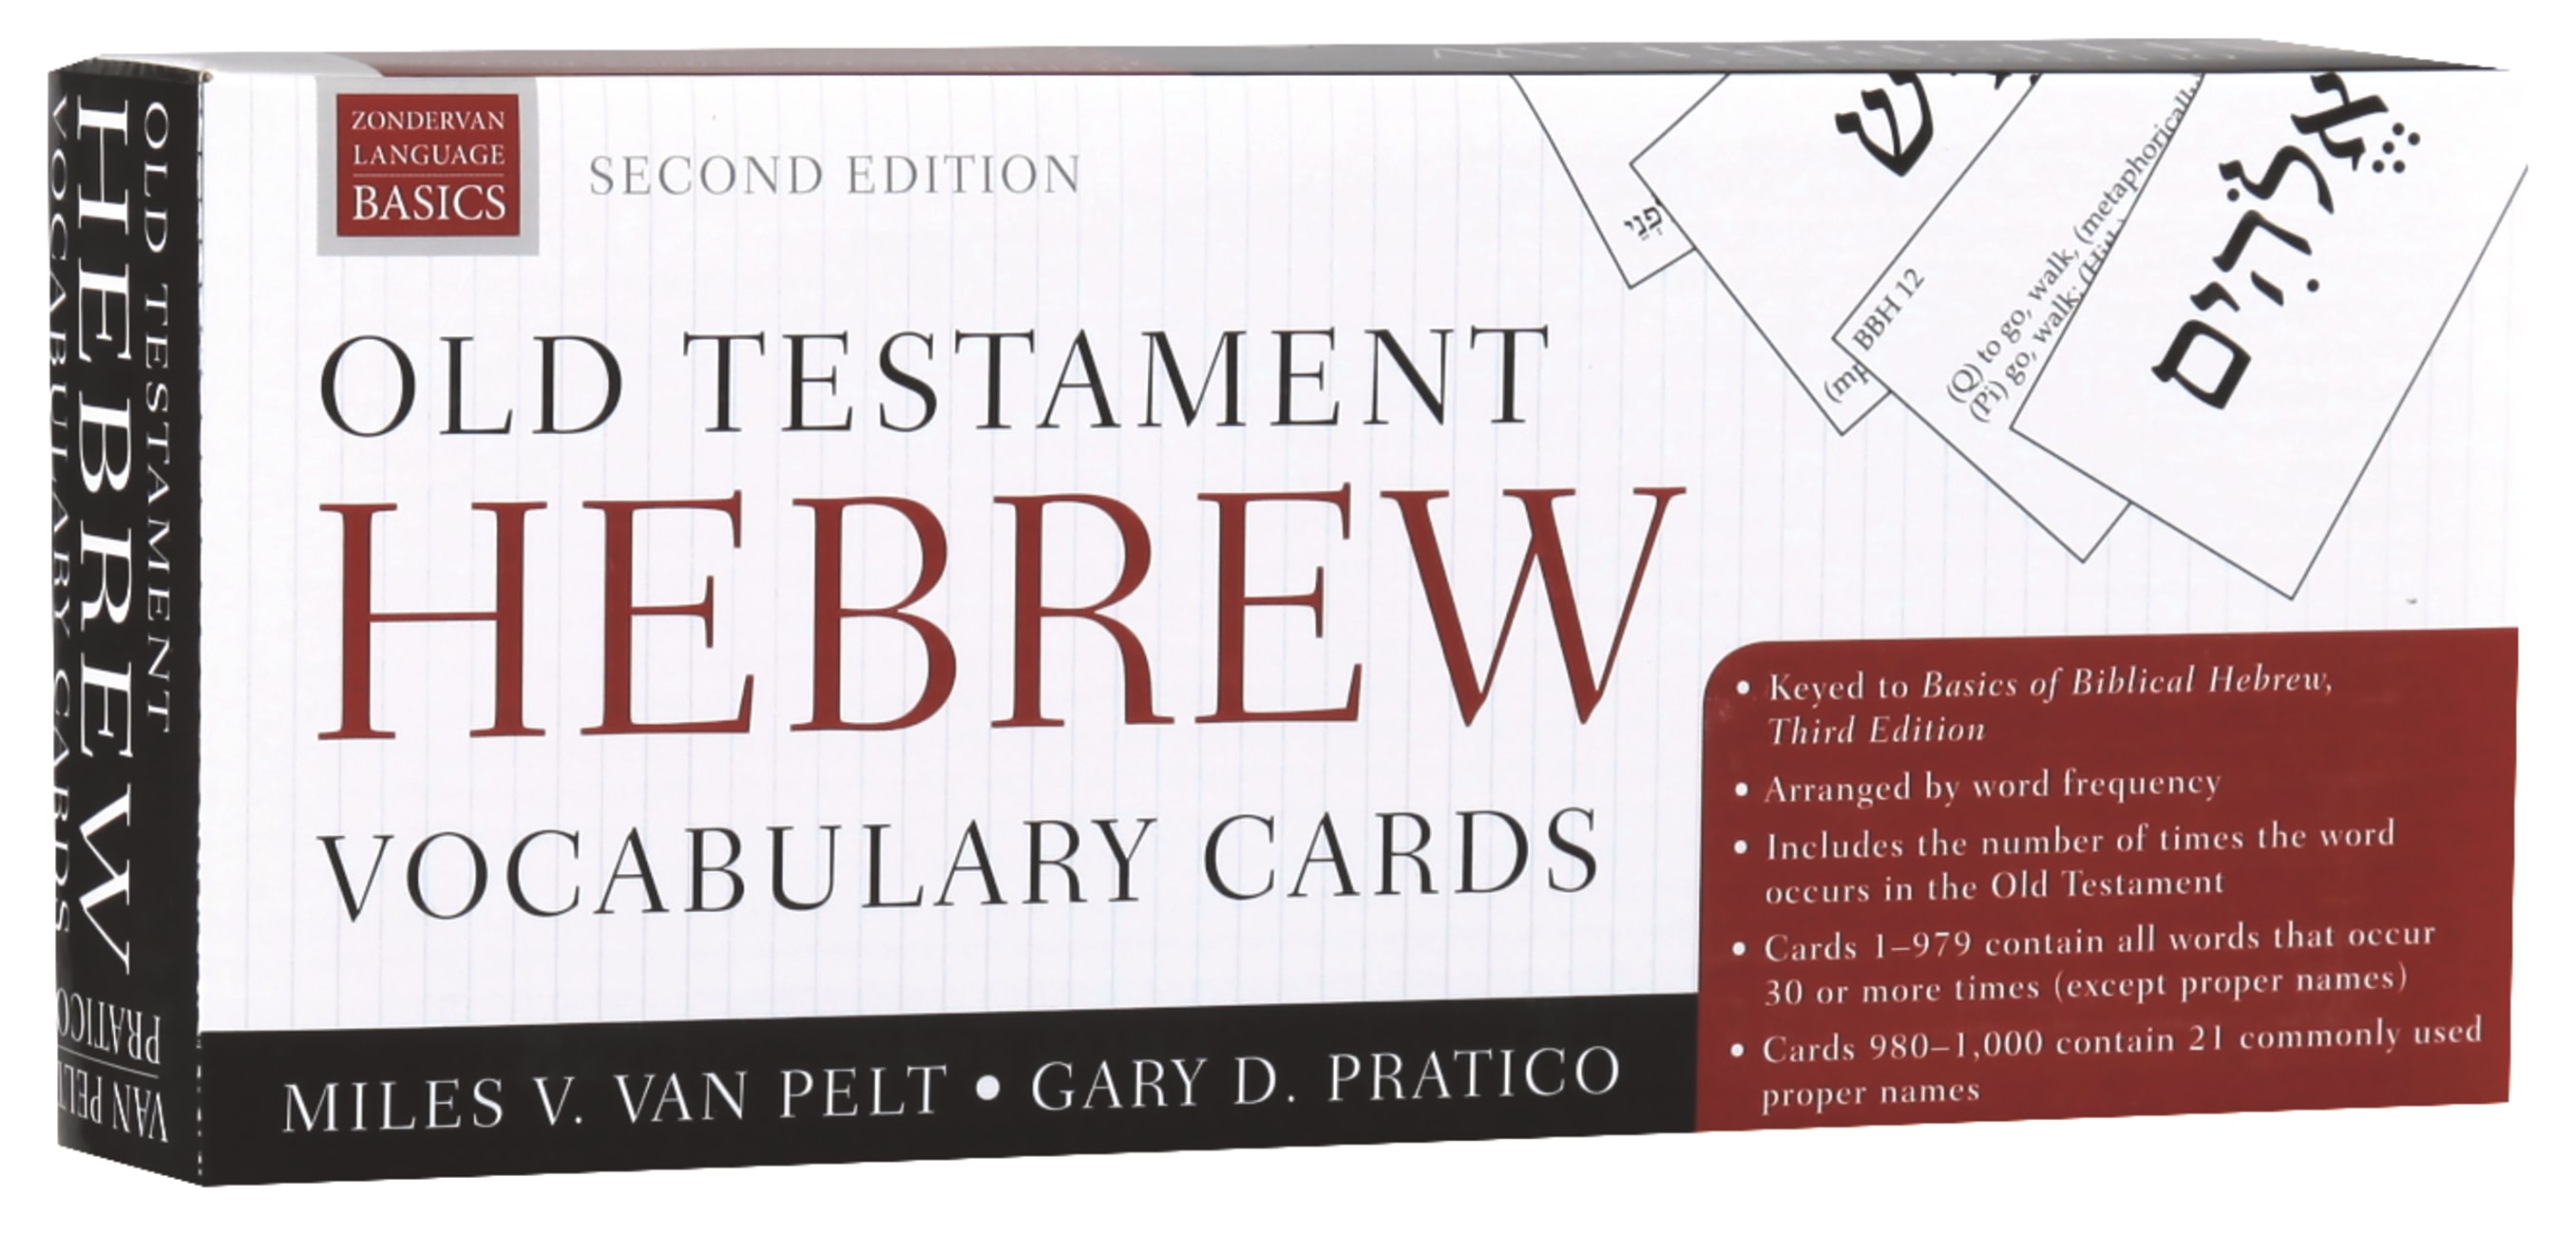 Old Testament Hebrew Vocabulary Cards Second Edition 